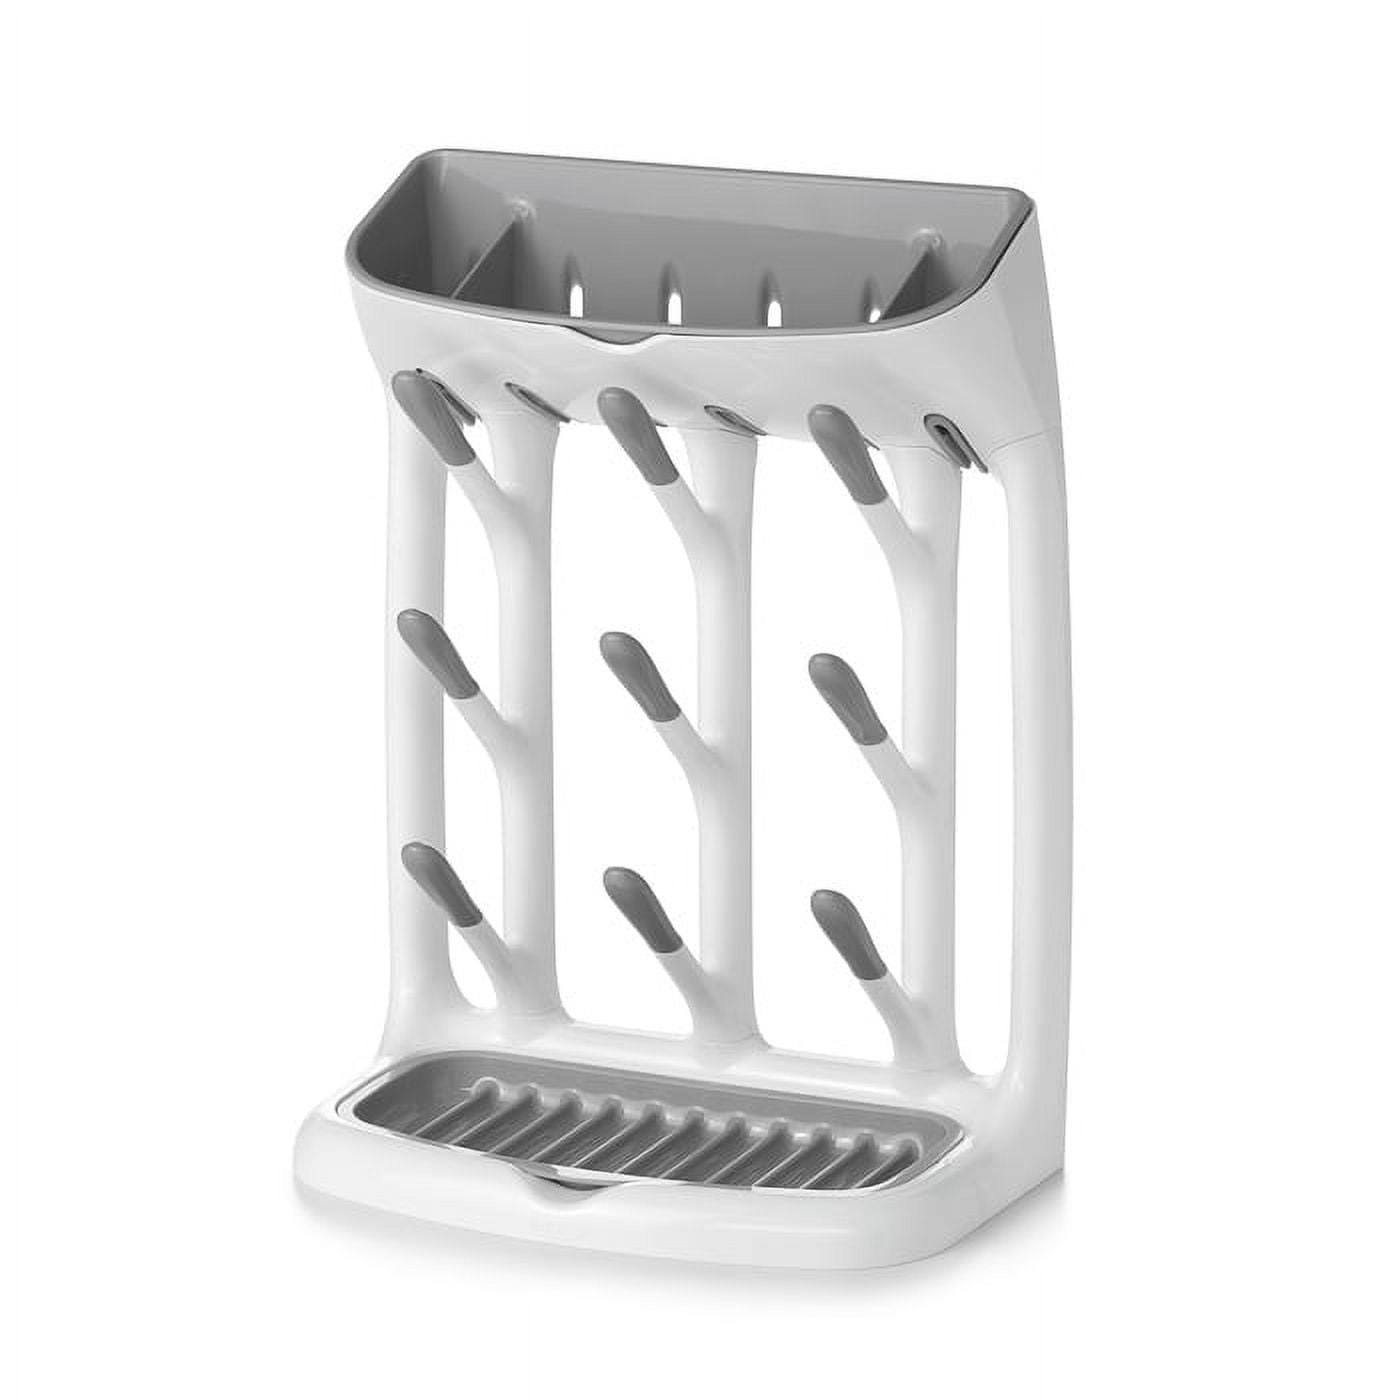 OXO Tot Travel Size Drying Rack … curated on LTK